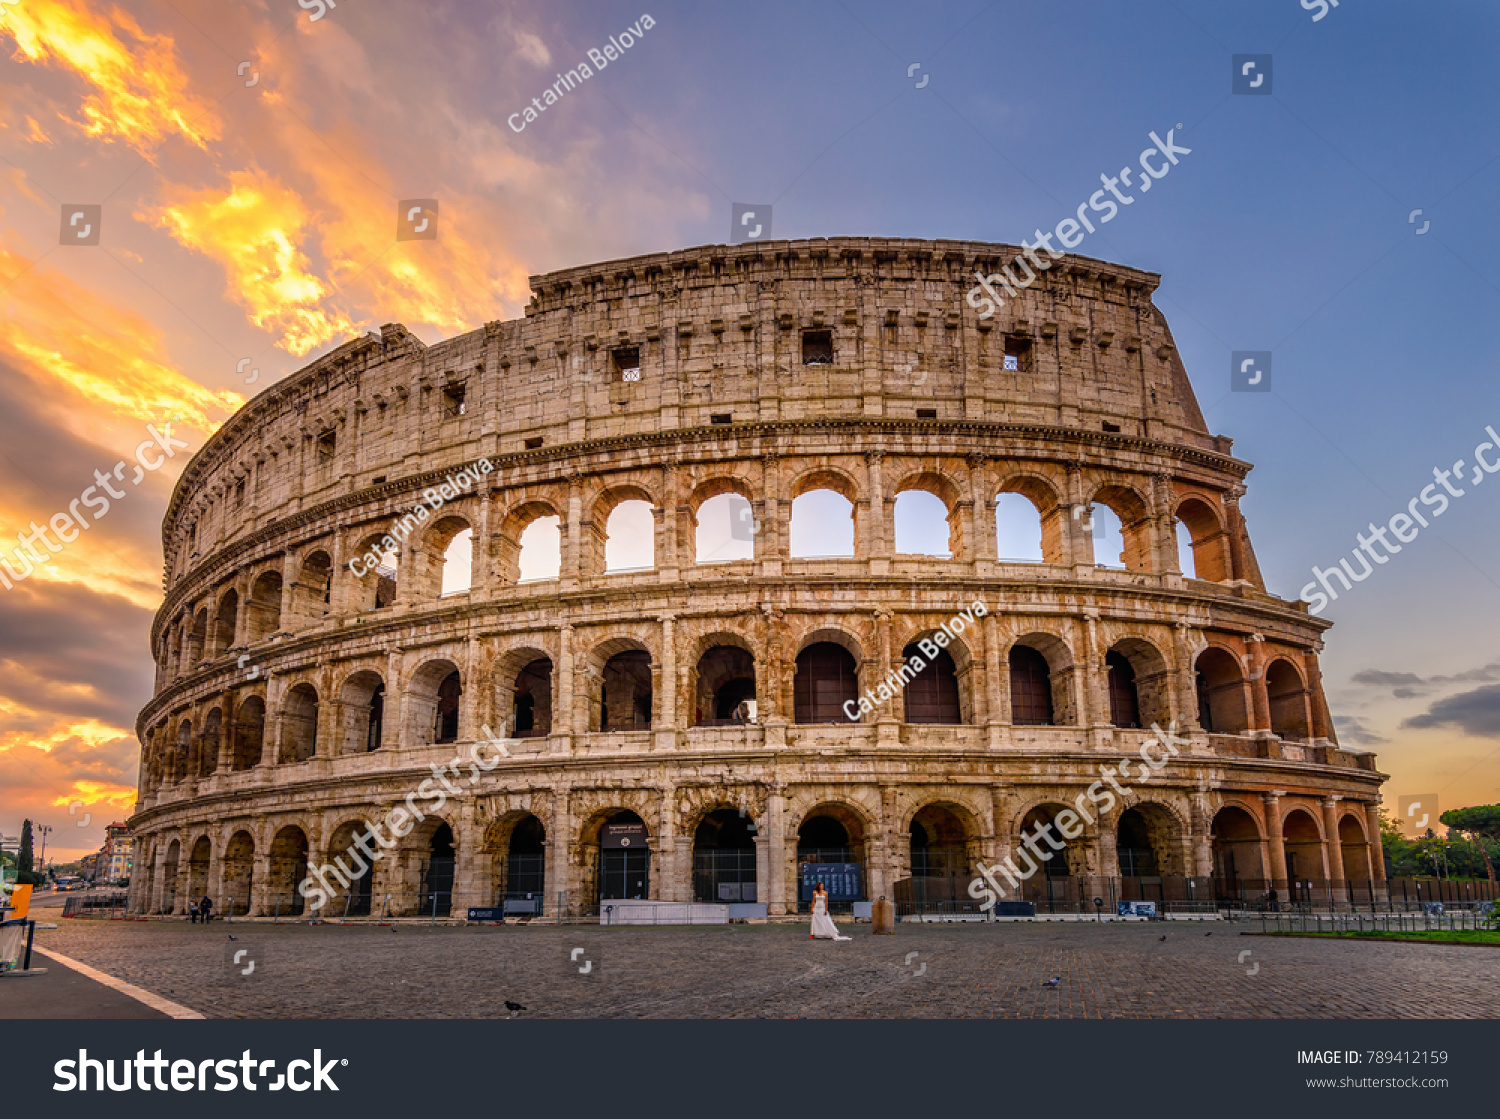 Sunrise view of Colosseum in Rome, Italy. Rome architecture and landmark. Rome Colosseum is one of the main attractions of Rome and Italy #789412159